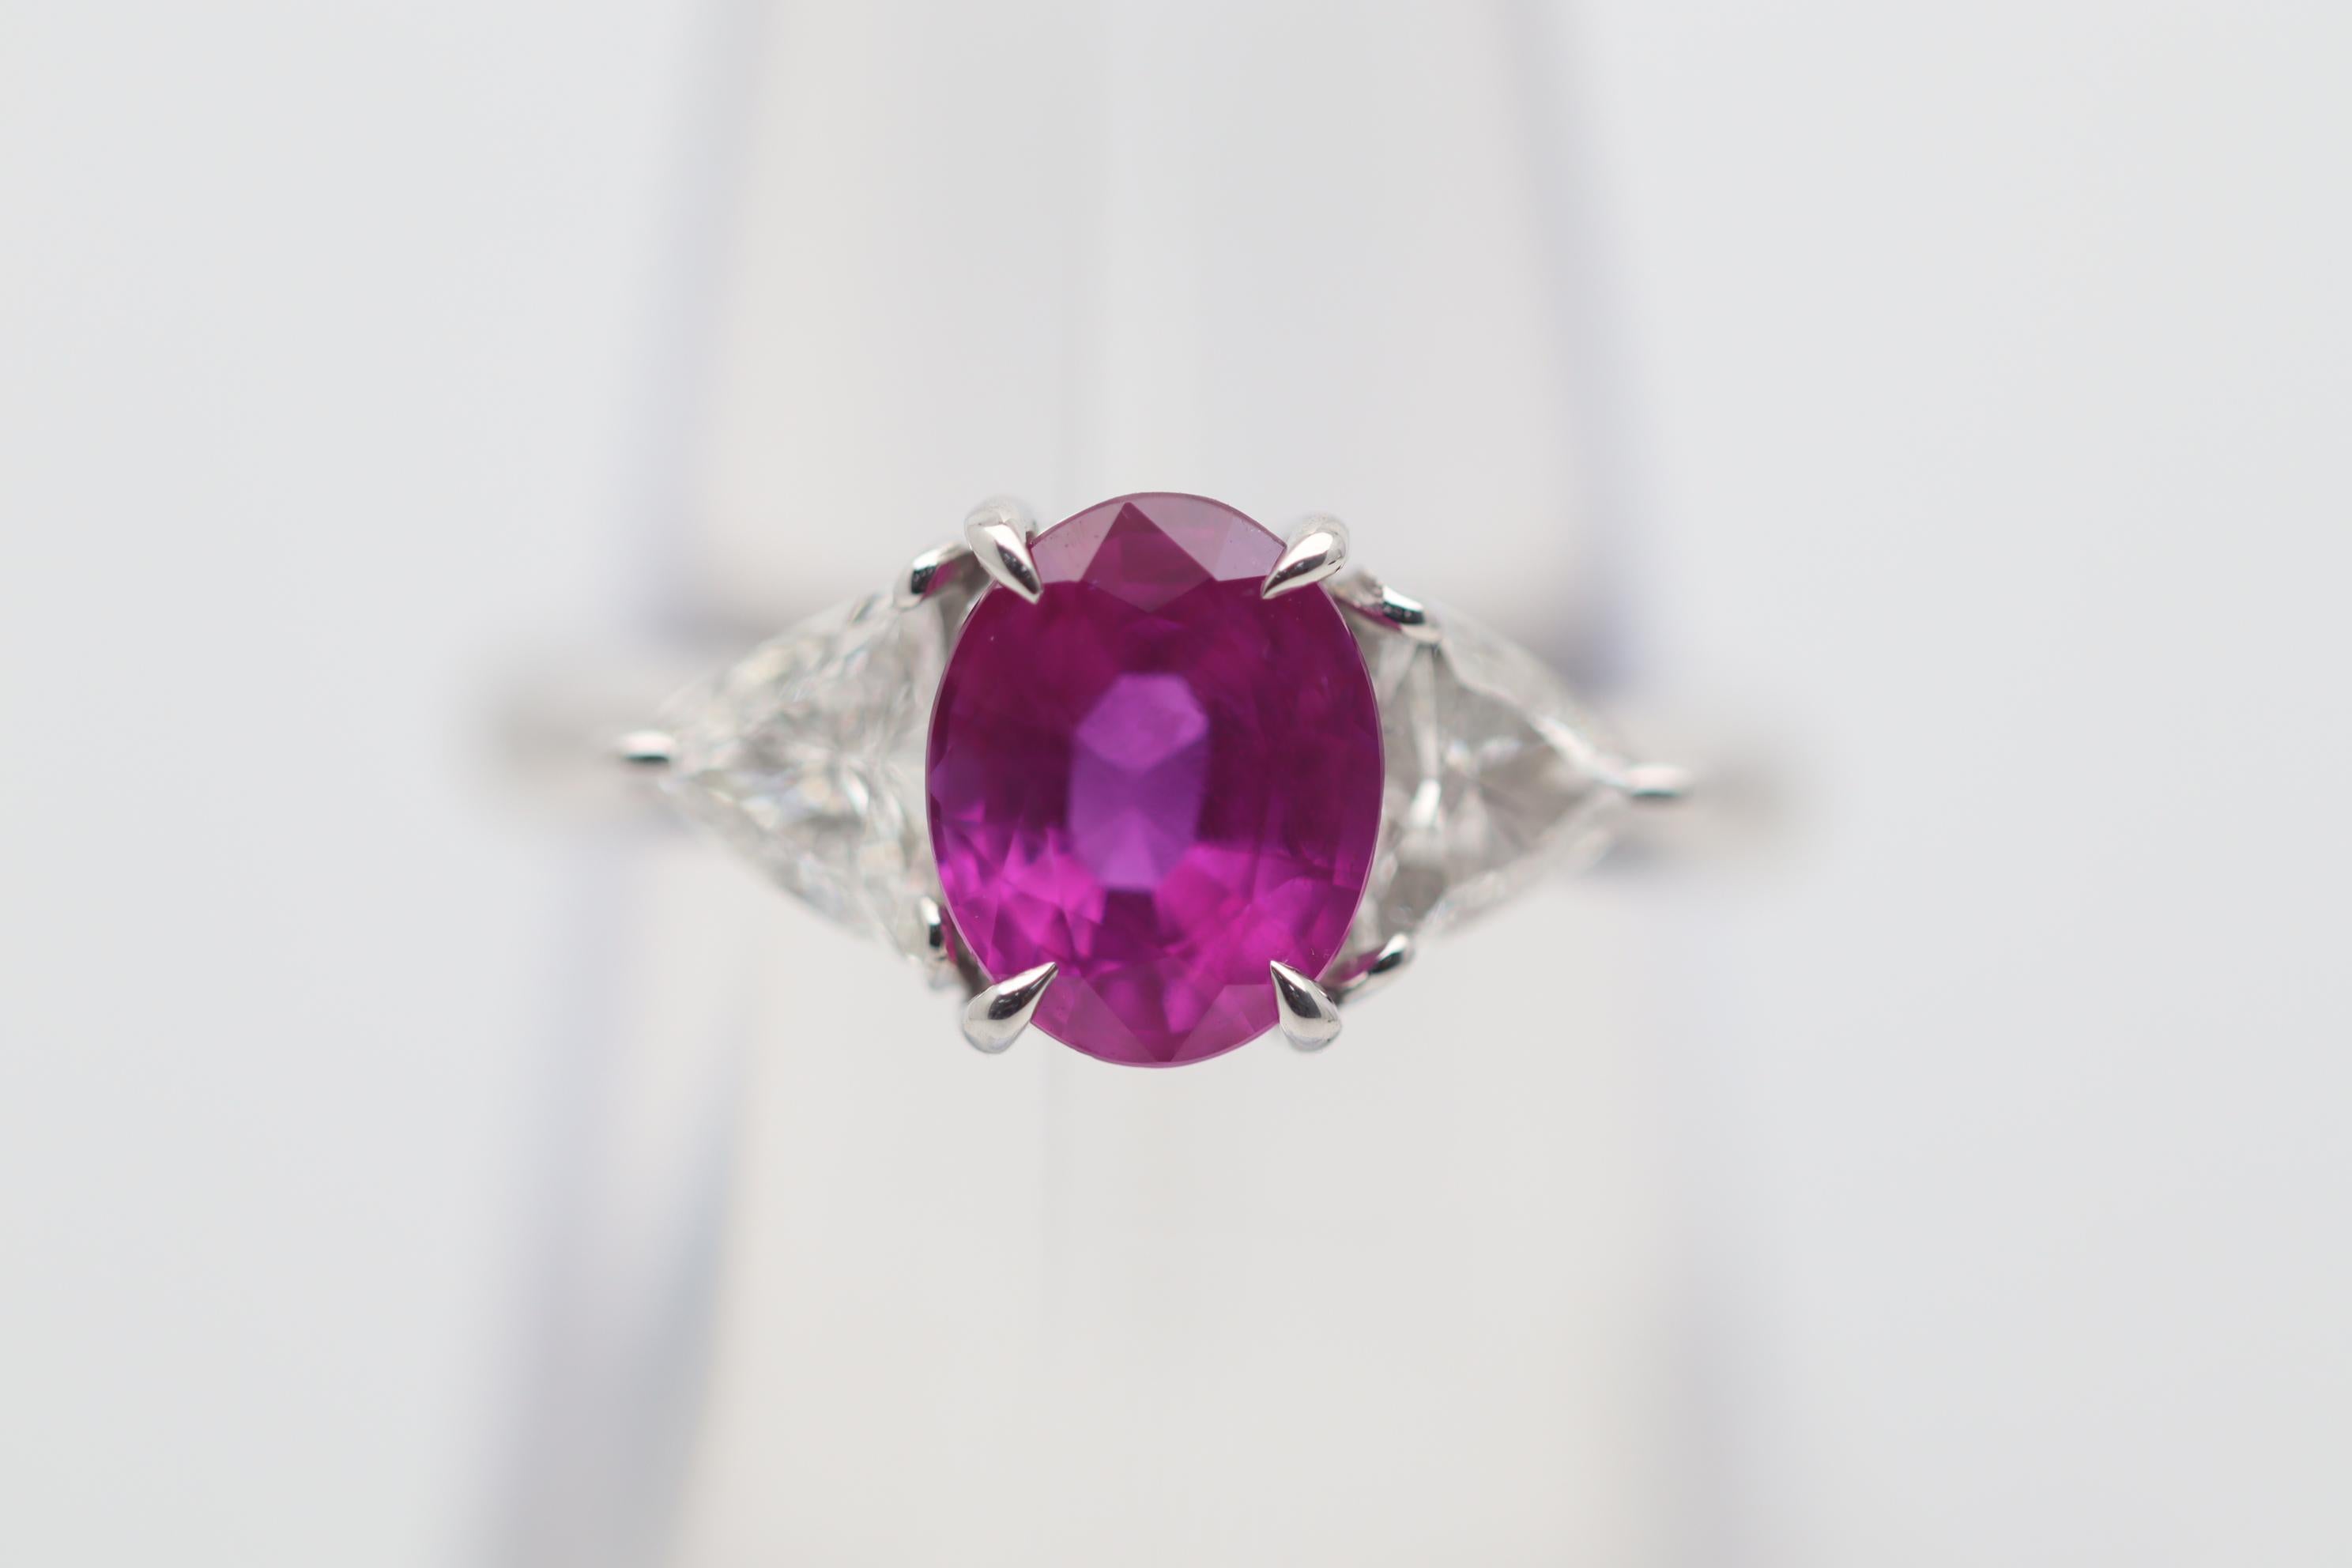 A classic stylish 3-stone gemstone platinum ring featuring a fine vivid pink sapphire! The sapphire weighs 2.08 carats and has a rich intense vivid pink color making it almost like a ruby! It is complemented by 2 triangular-cut diamonds set on its